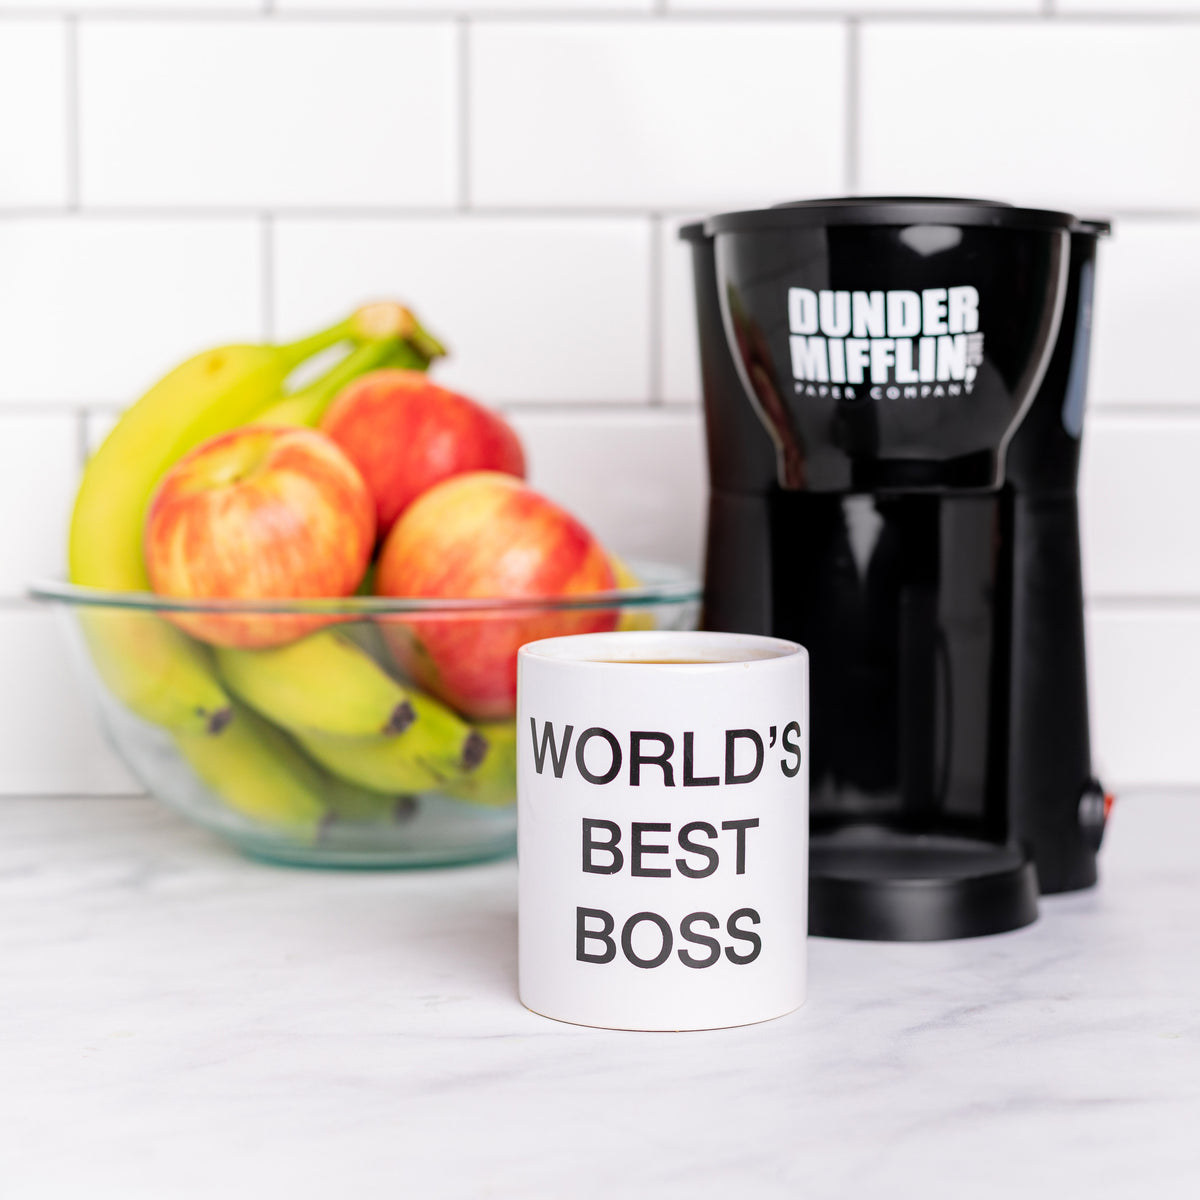 The Office Coffee Maker Set